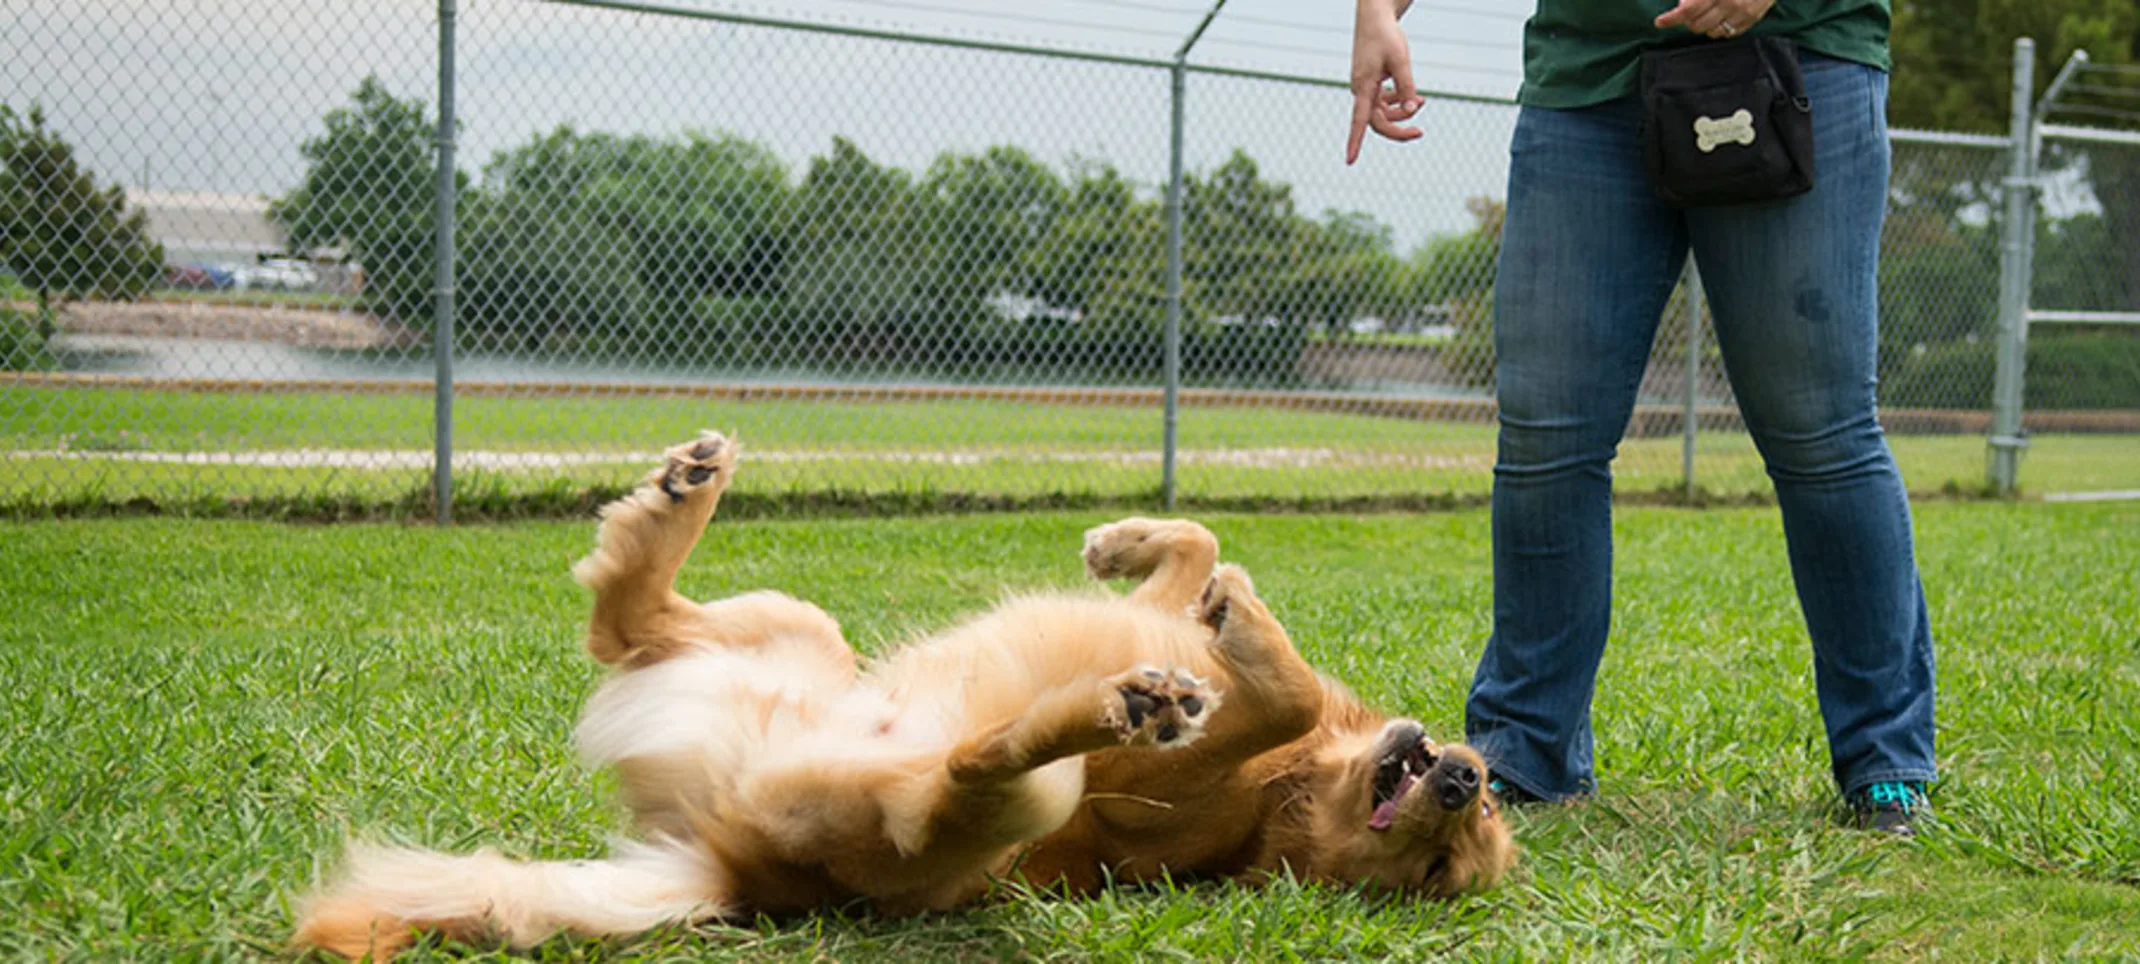 Retriever rolling over in grass with trainer